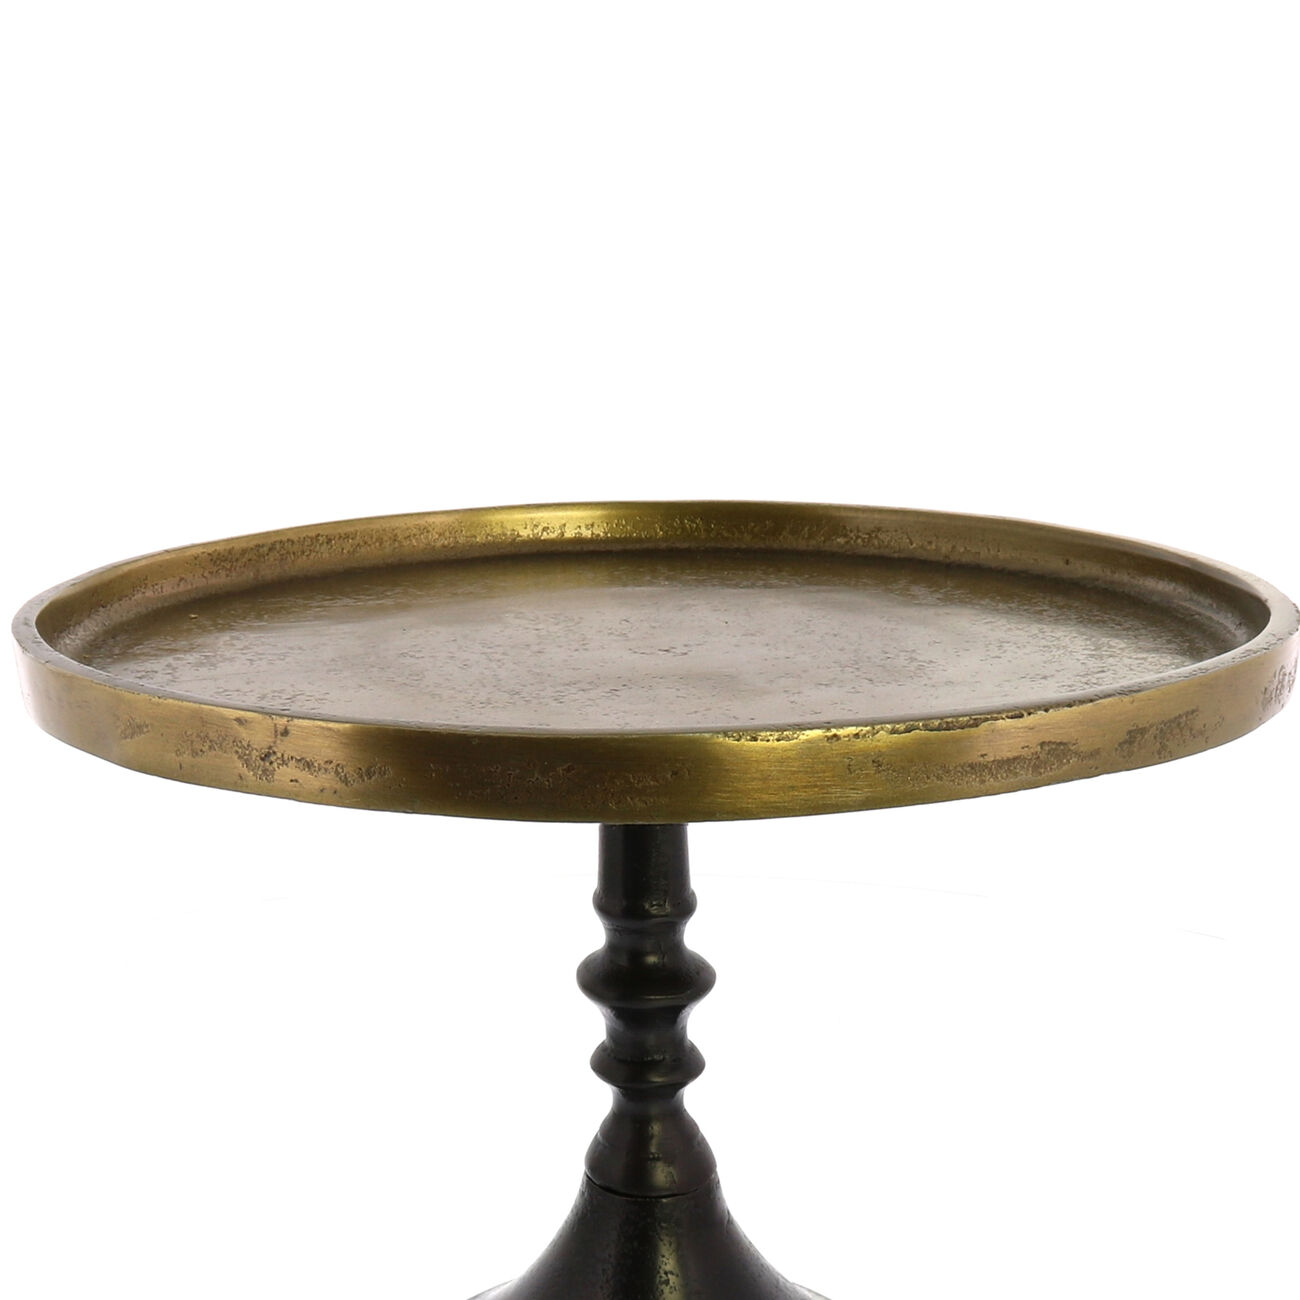 Metal Pedestal with Turned Base, Large, Black and Brass